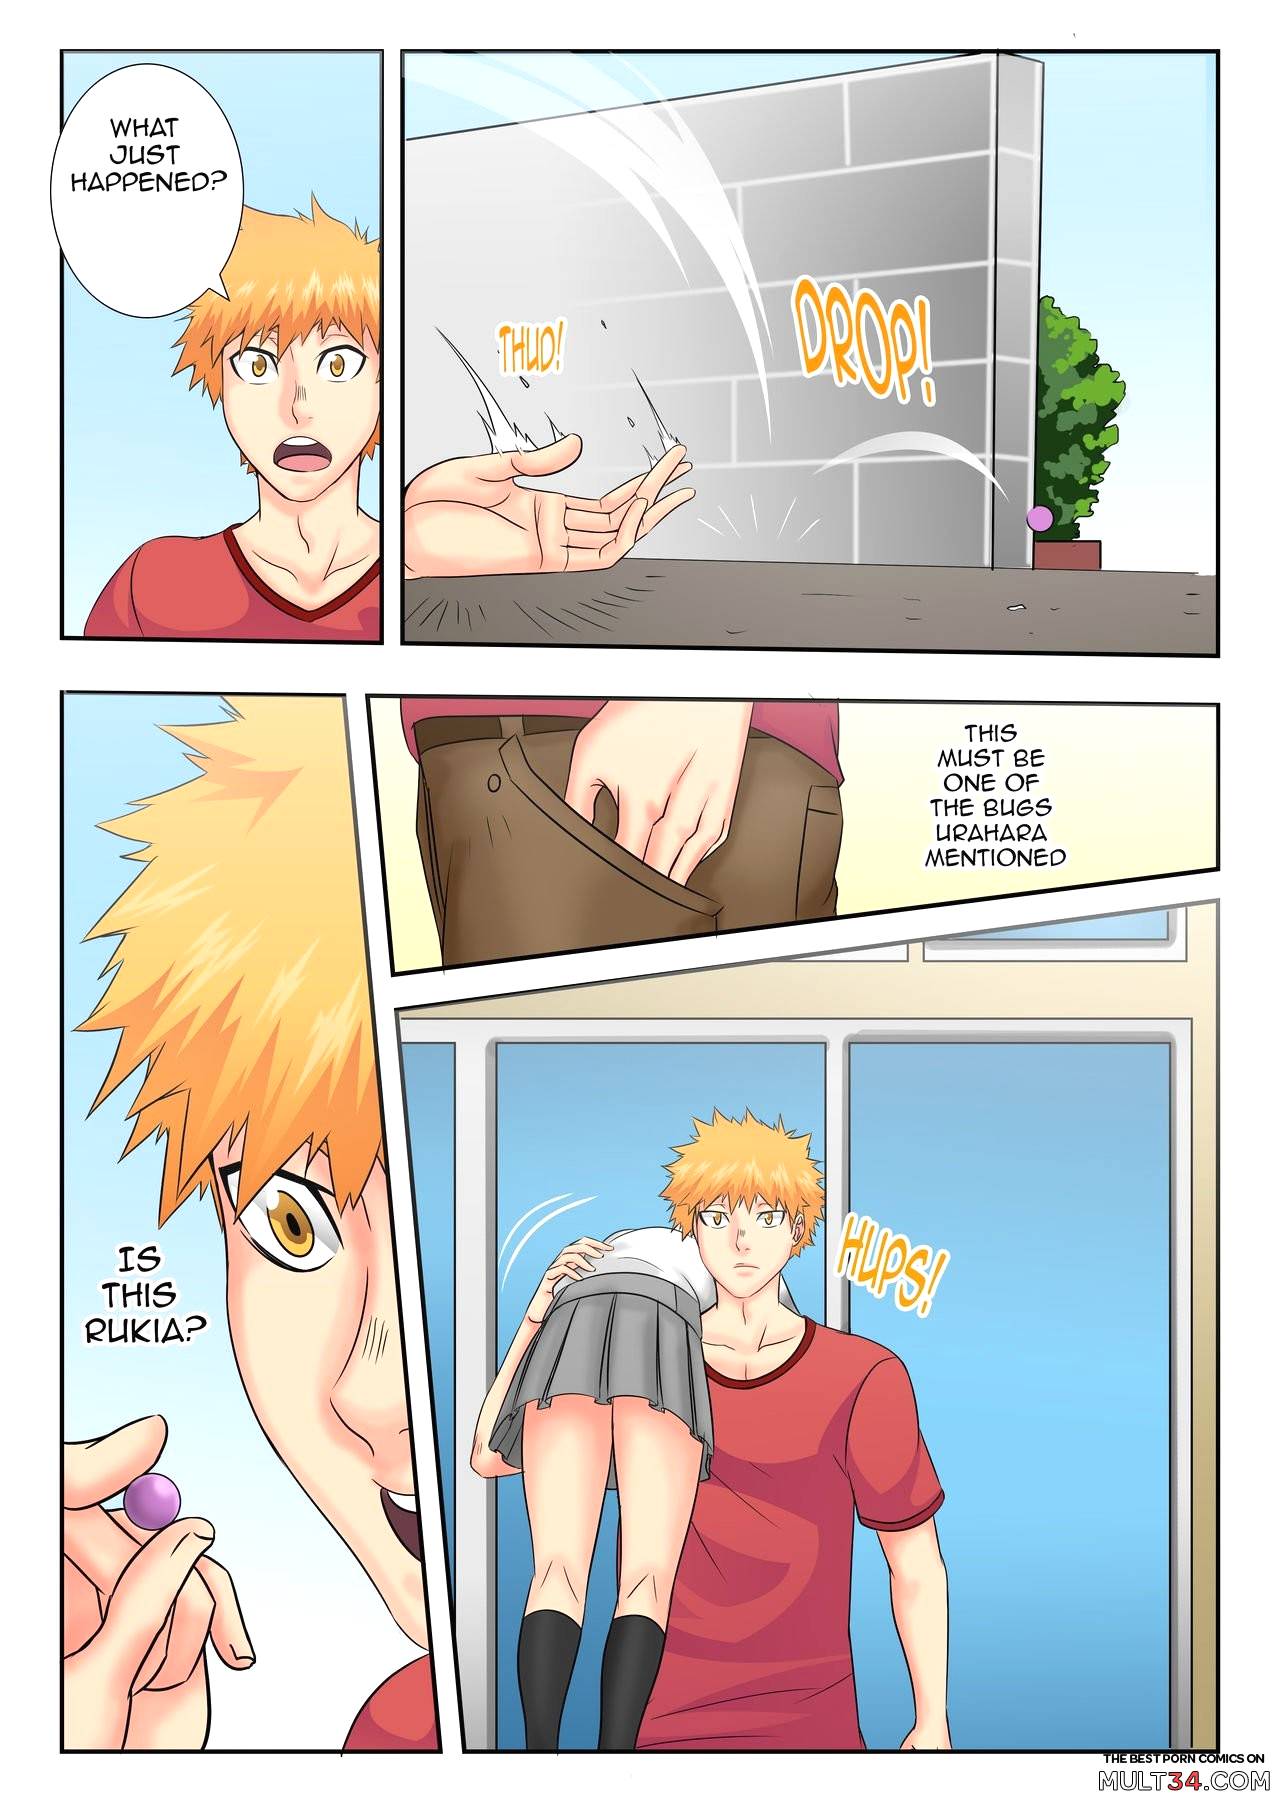 Bleach: A What If Story page 5